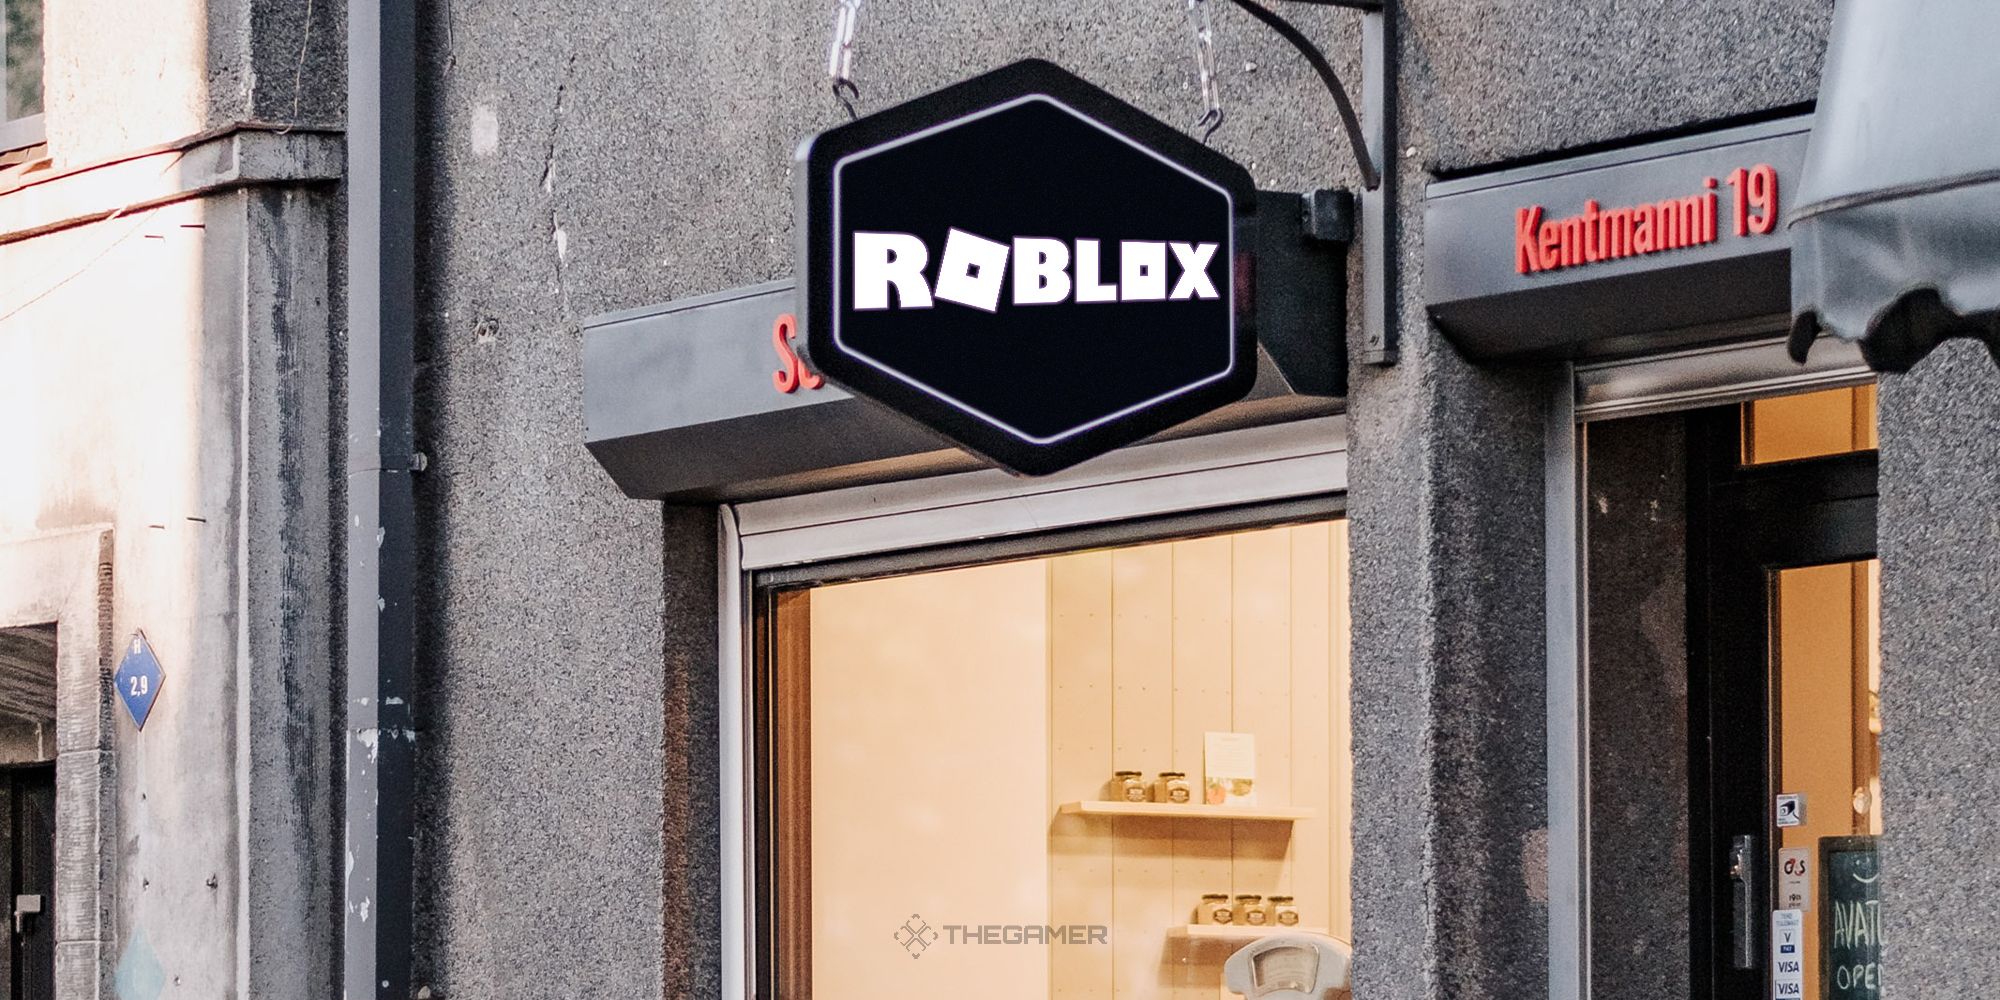 Roblox A Company Valued At $56 Billion Apparently Qualifies For A Small Business Tax Break